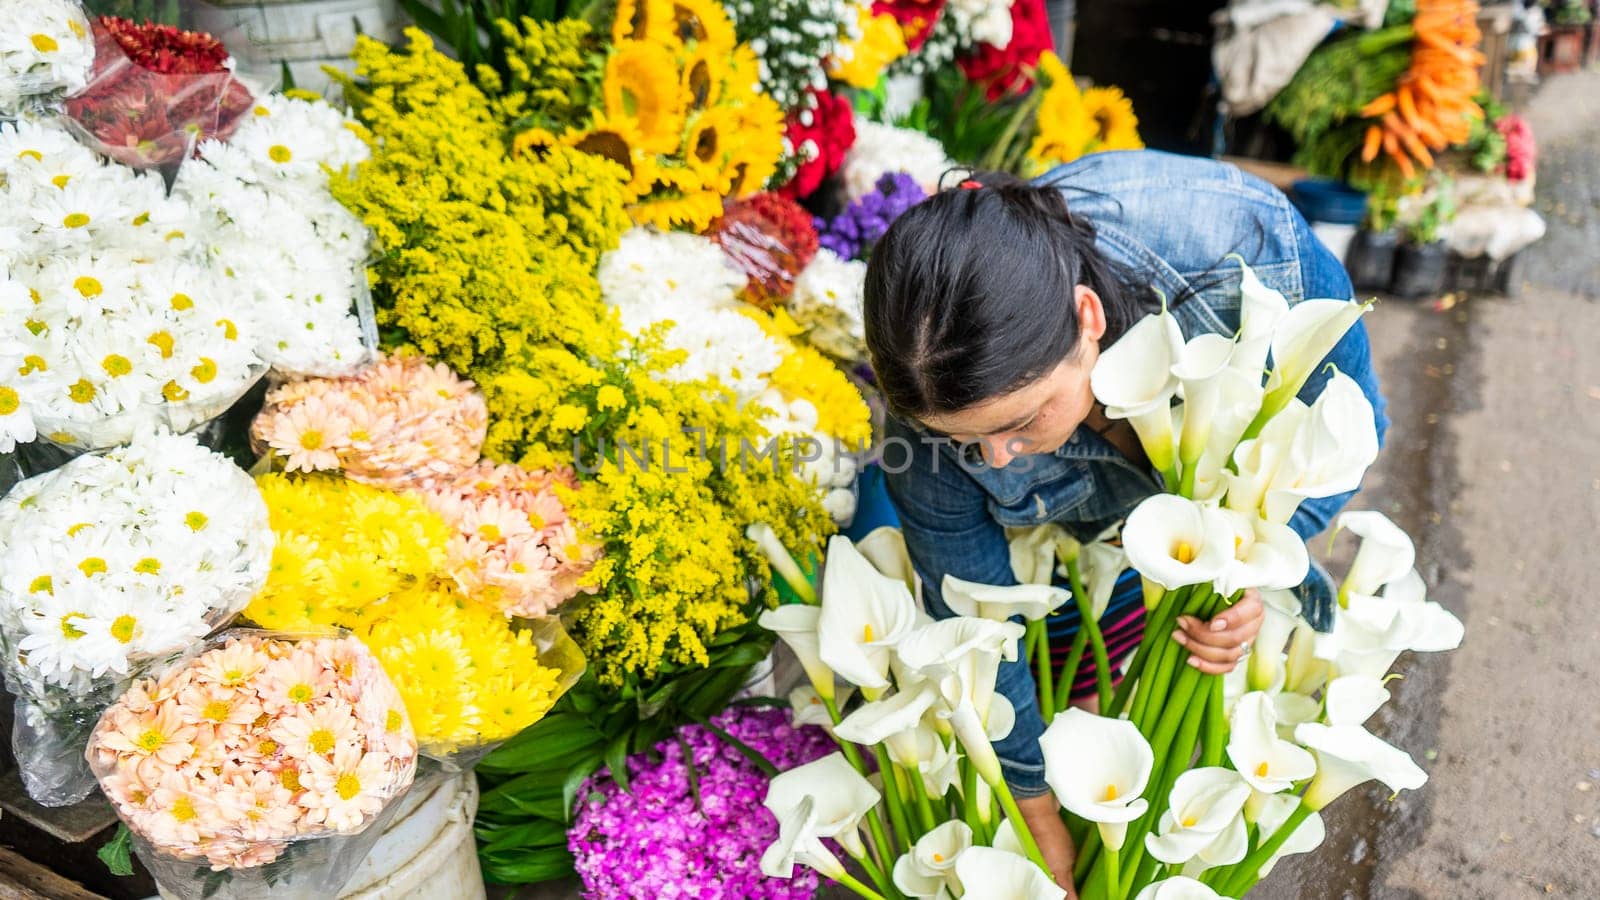 Woman tending to her small retail business selling flowers in Nicaragua, Latin America, Central America by cfalvarez